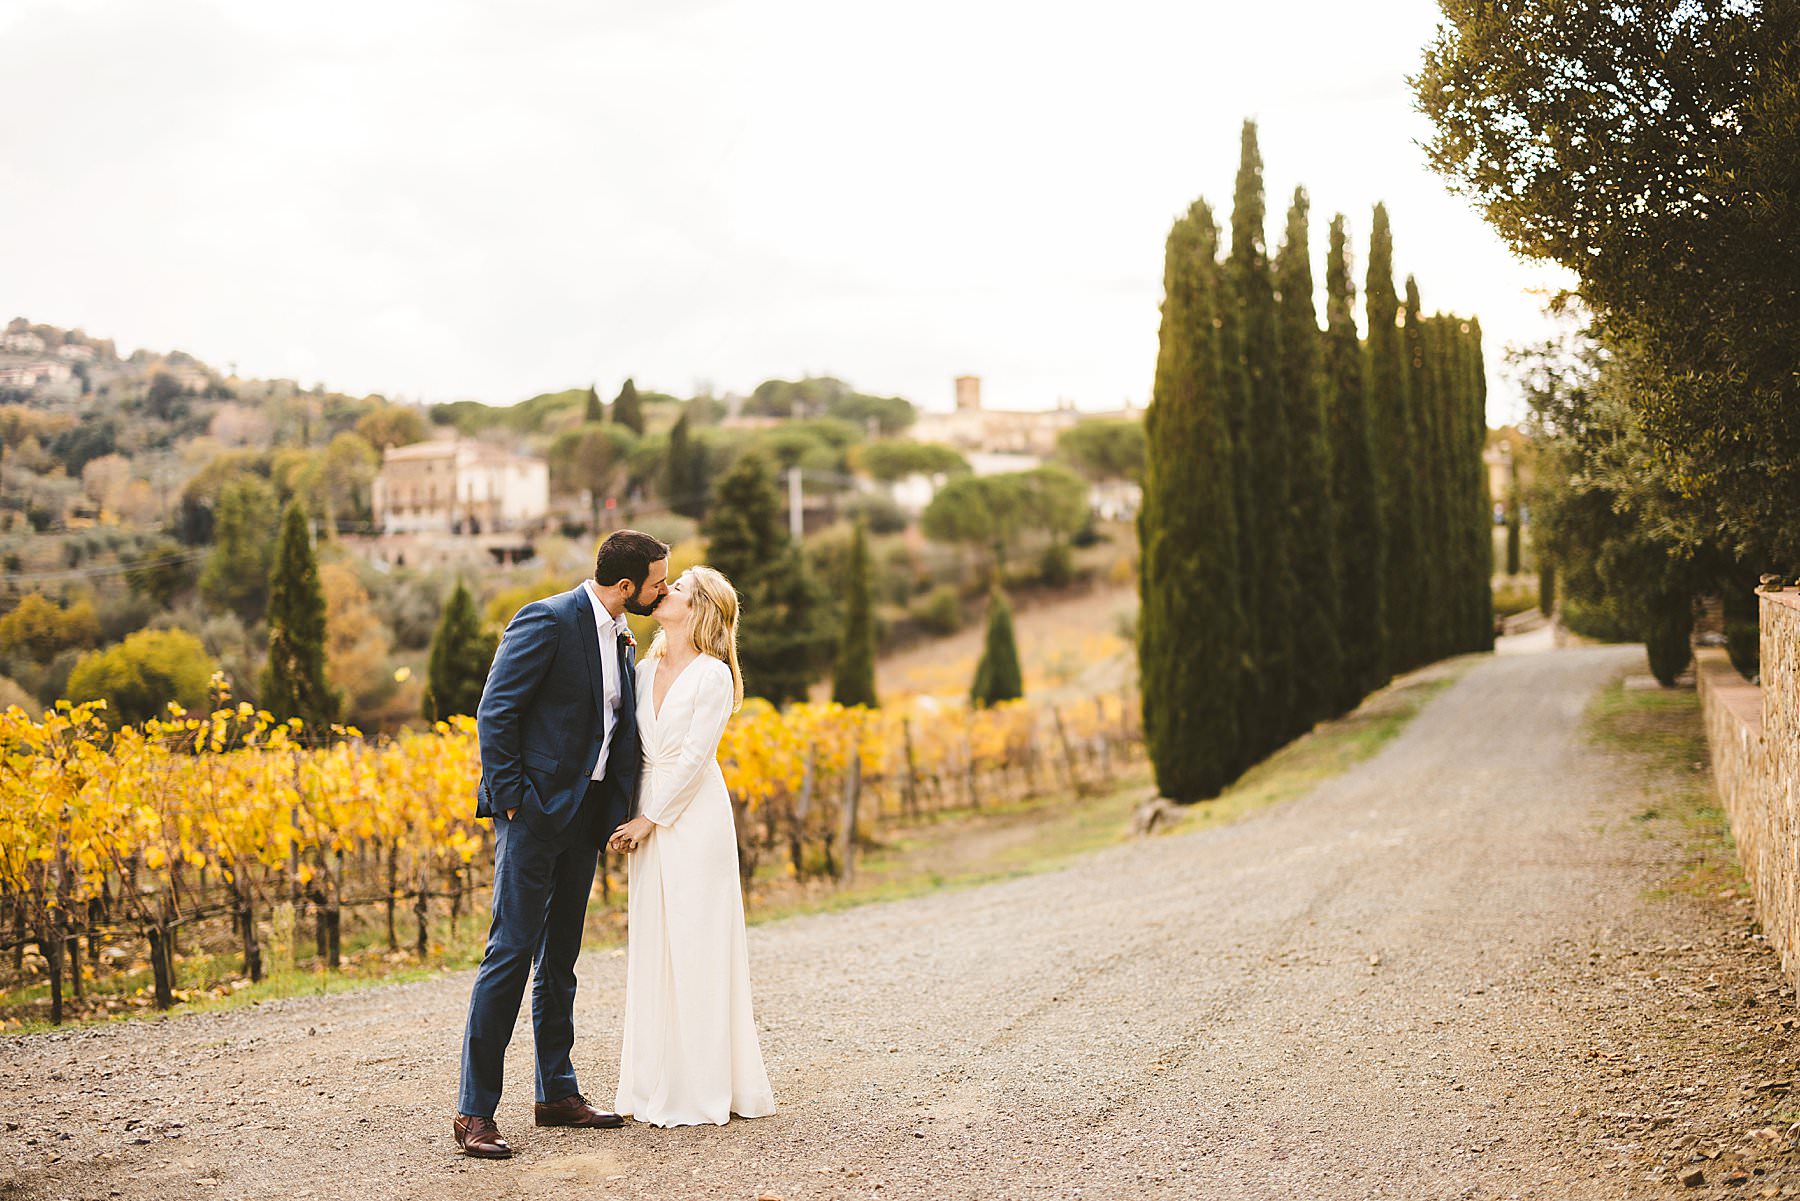 A romantic elopement in Tuscany, surrounded by vineyards near Montalcino